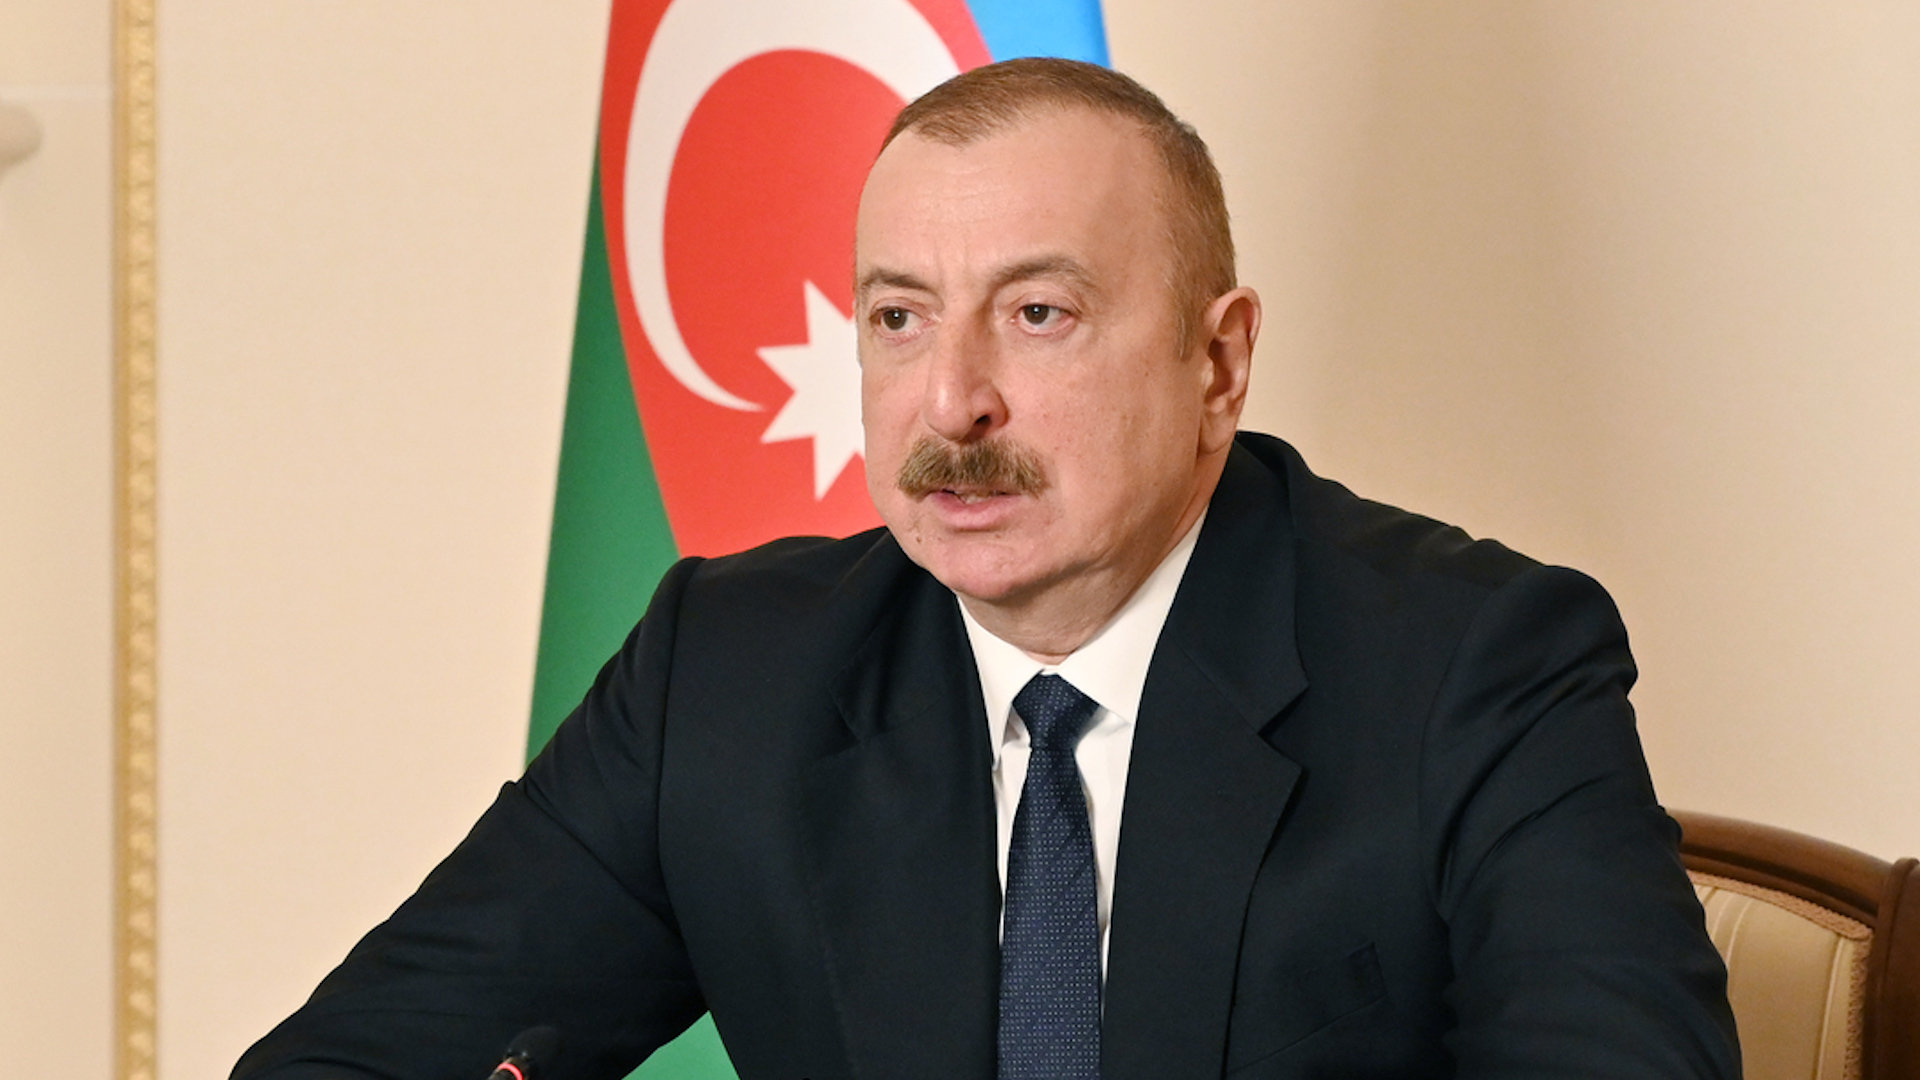 Aliyev continues to try and push Armenians out of Karabakh